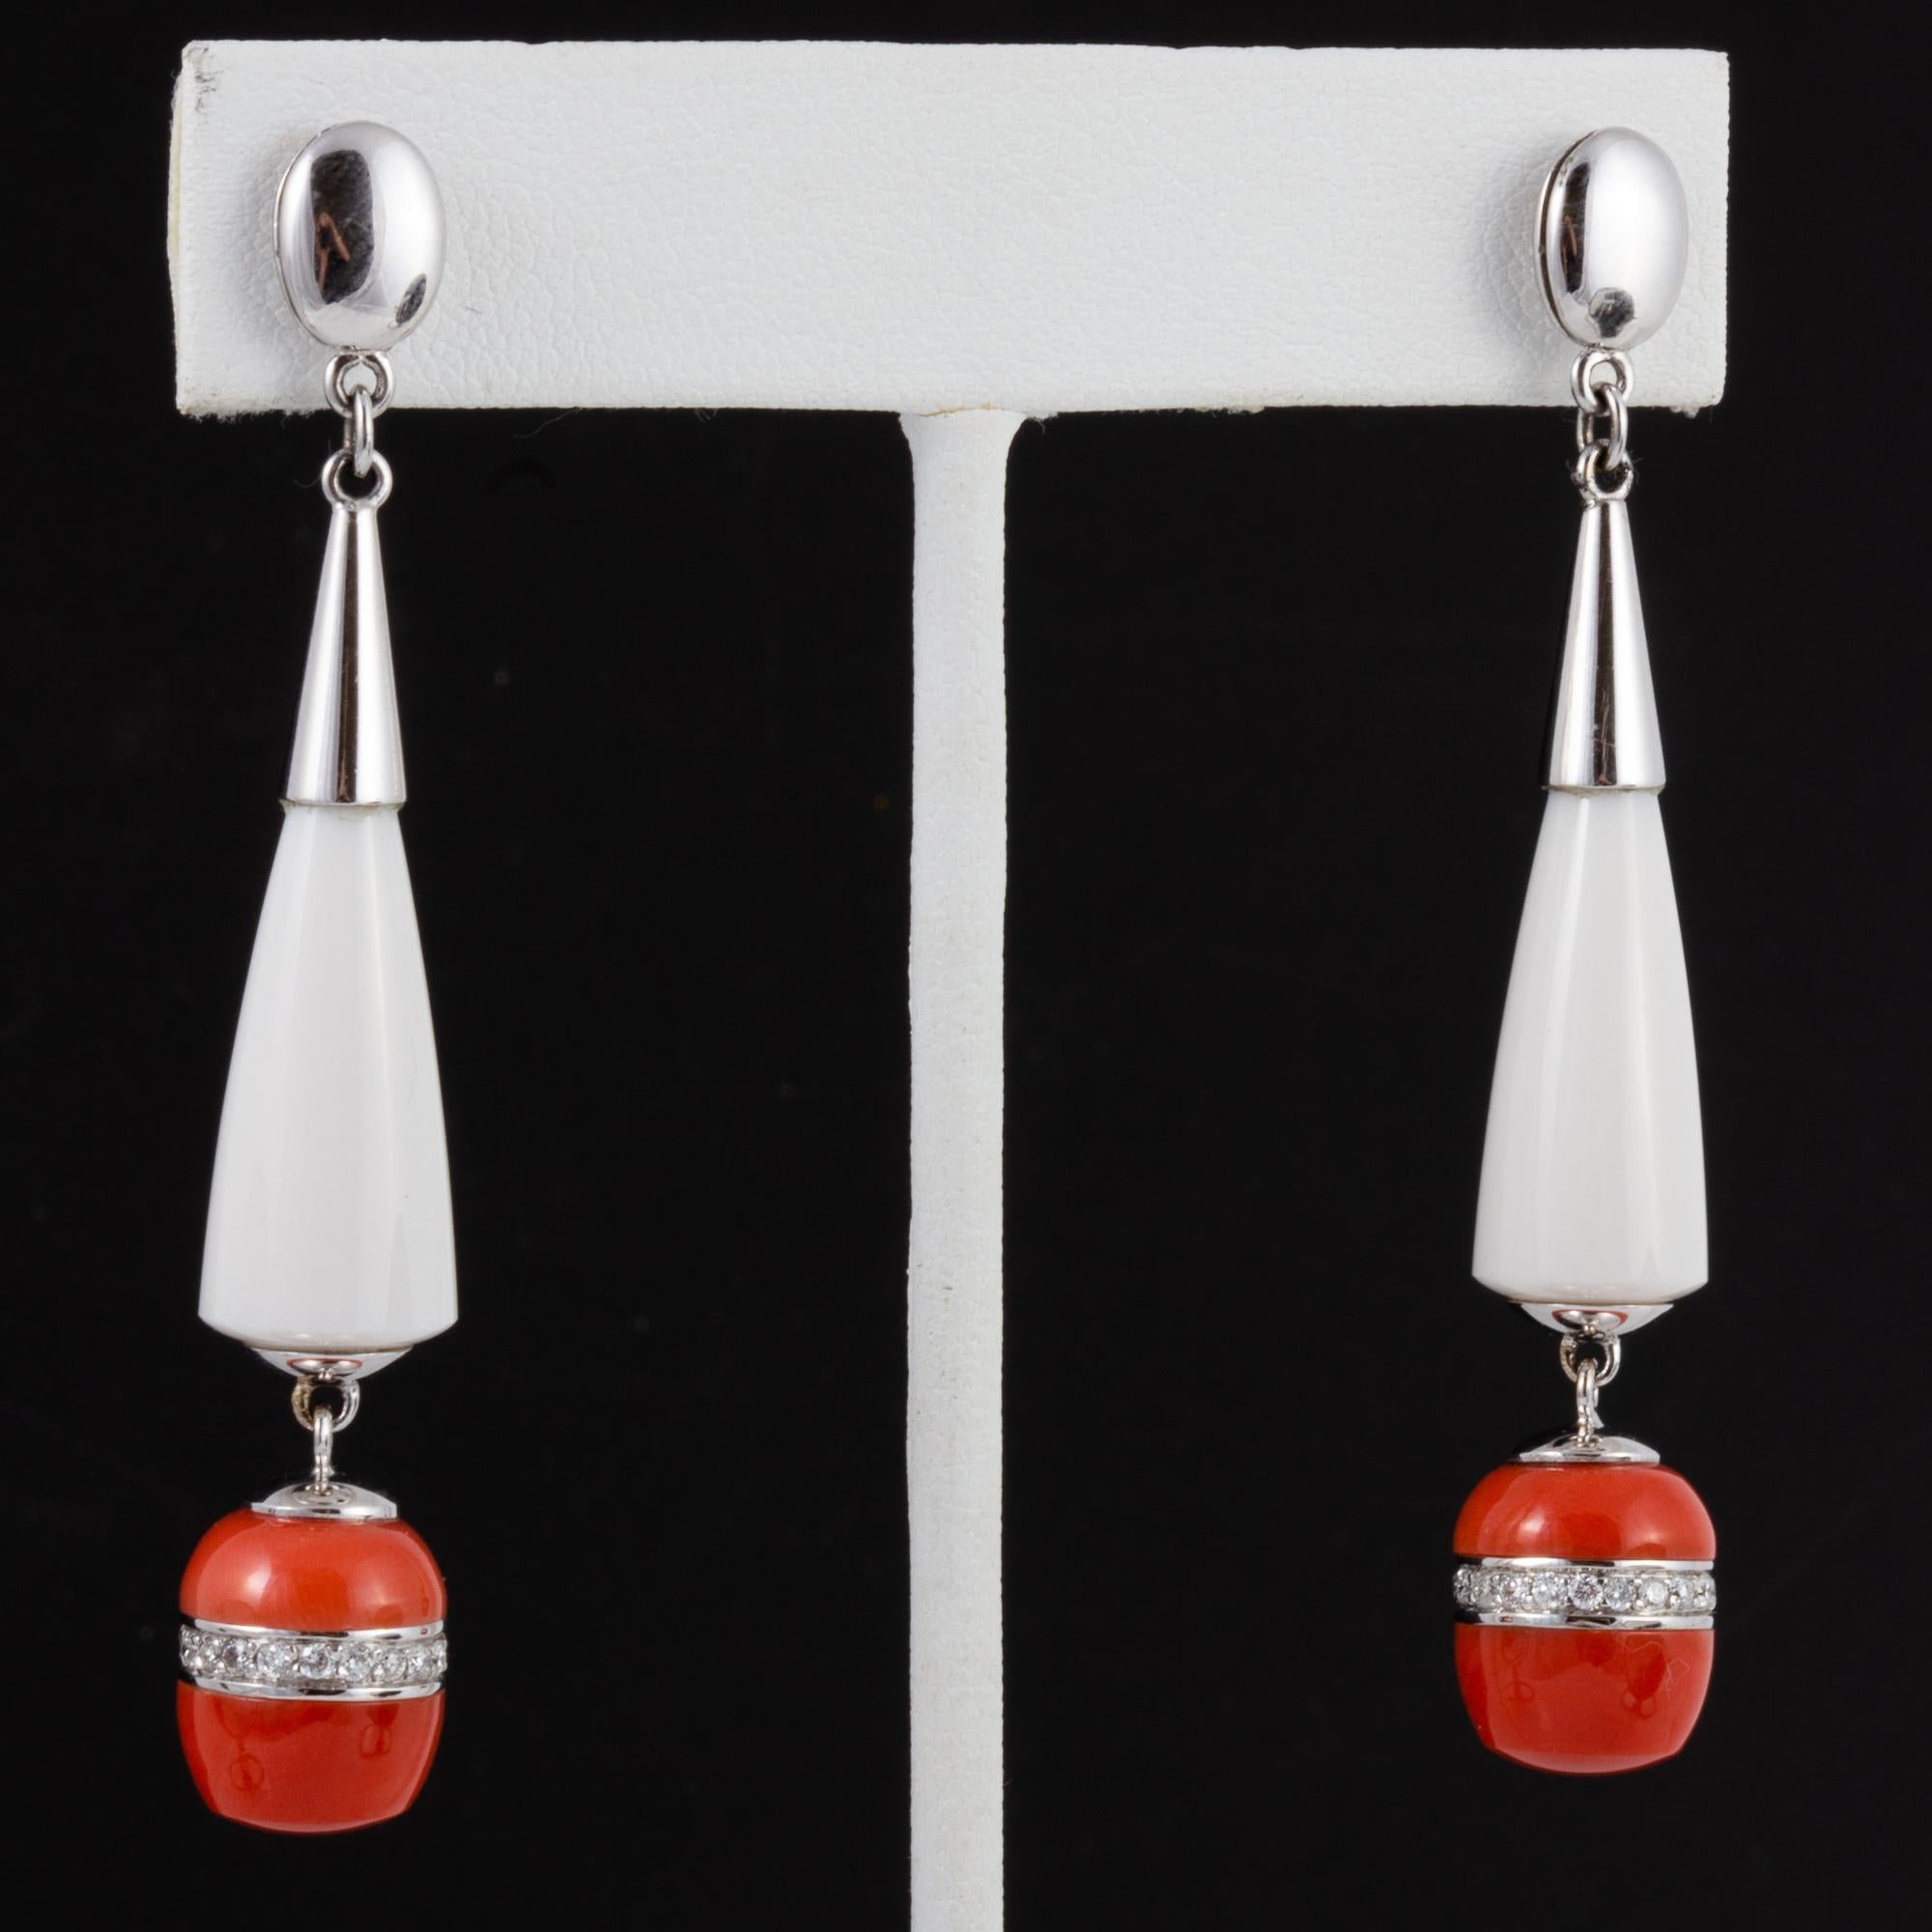 Amazing one of a kind earrings with agate, coral and diamonds.  Handcrafted by a renowned Italian lapidary specialist in Milan.

Created by noted jewelry designer David Meelheim Designs, David creates unique pieces incorporating rare, fine, and